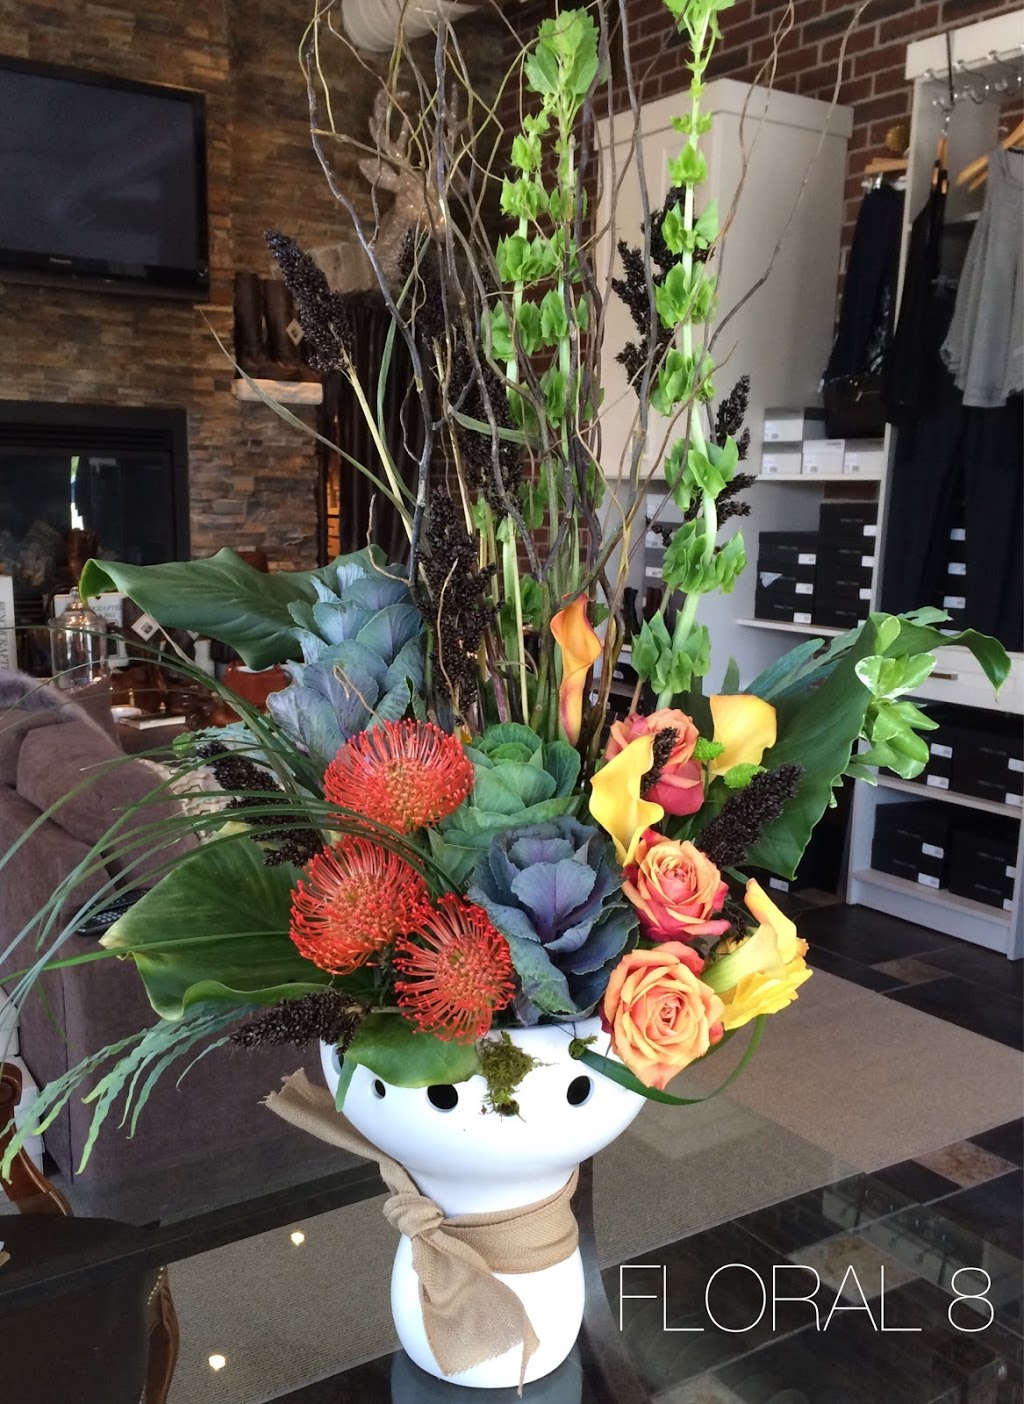 Floral 8 | 1155 Lauzon Rd a, Windsor, ON N8S 3M9, Canada | Phone: (844) 356-7258